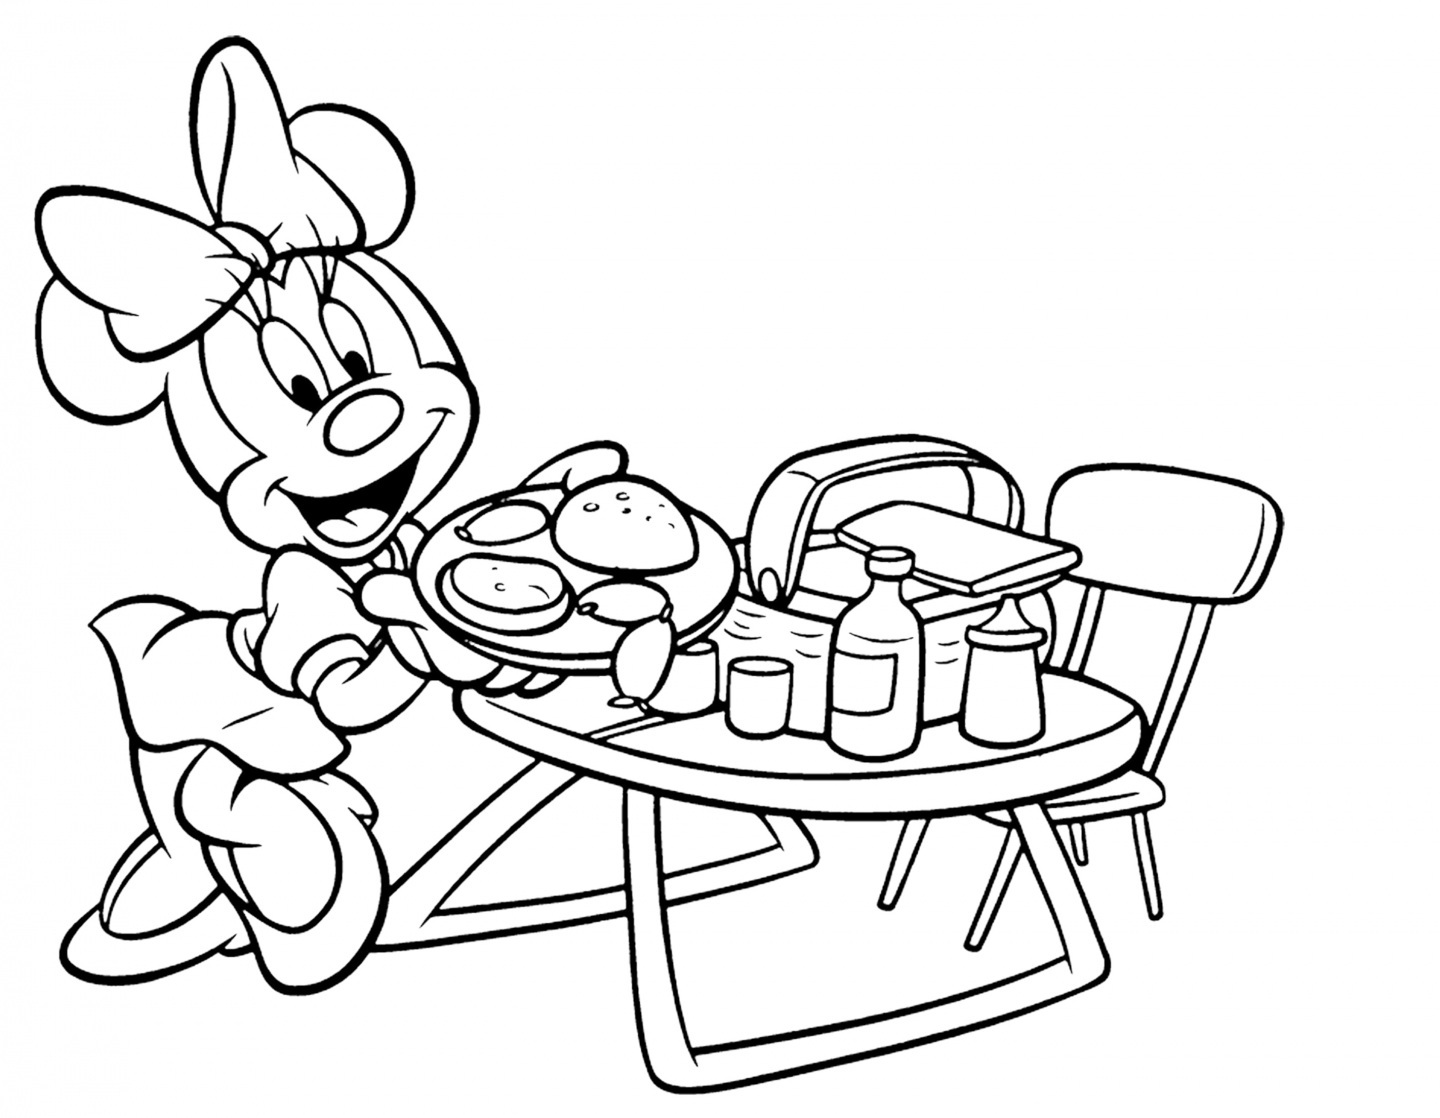 Minnie Mouse Preparing Cookout Food Coloring Page